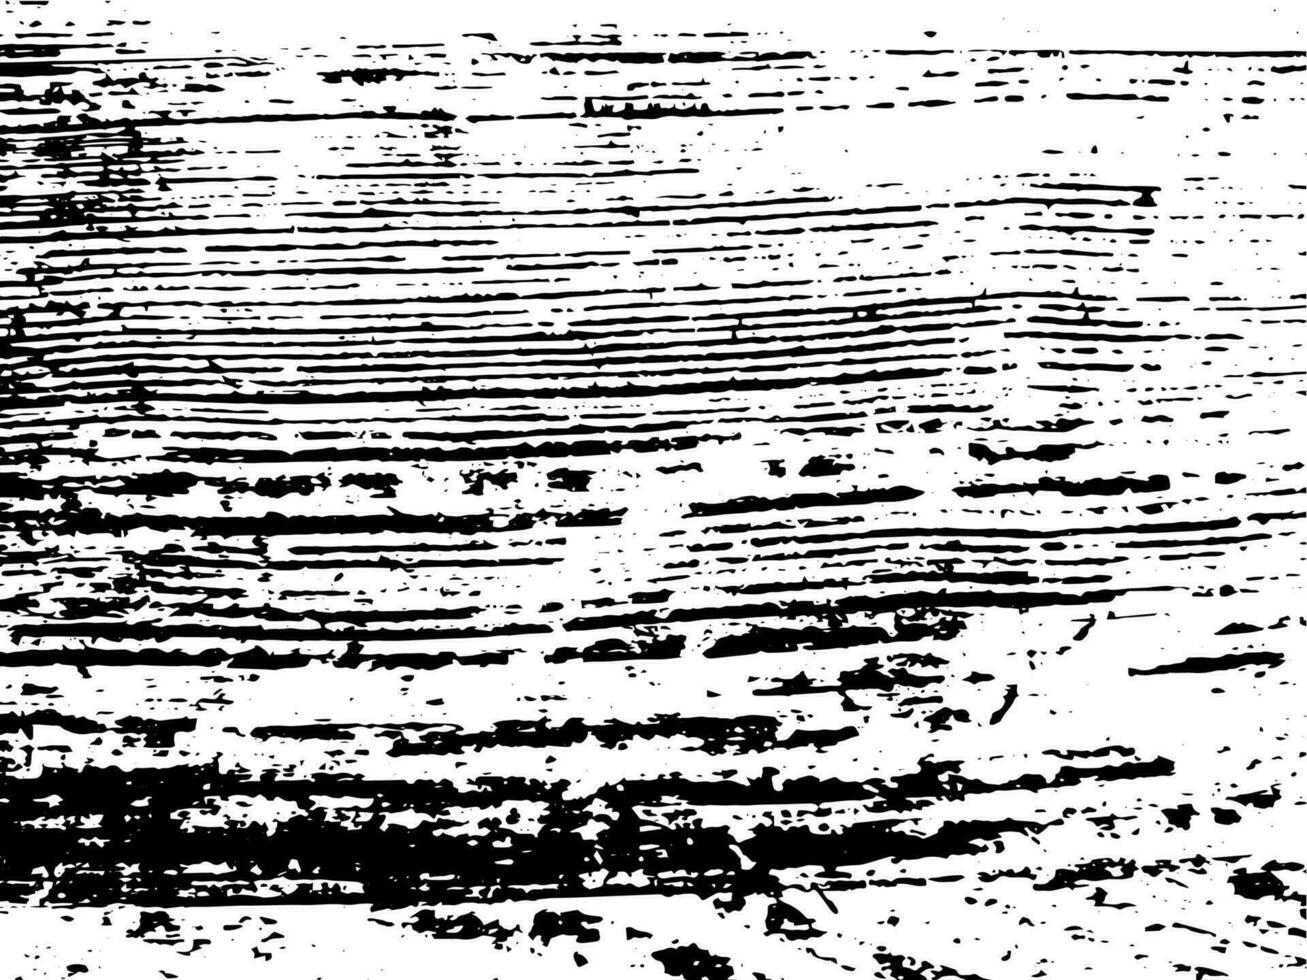 Grunge natural wood monochrome texture. Abstract wooden surface overlay background in black and white. Vector illustration